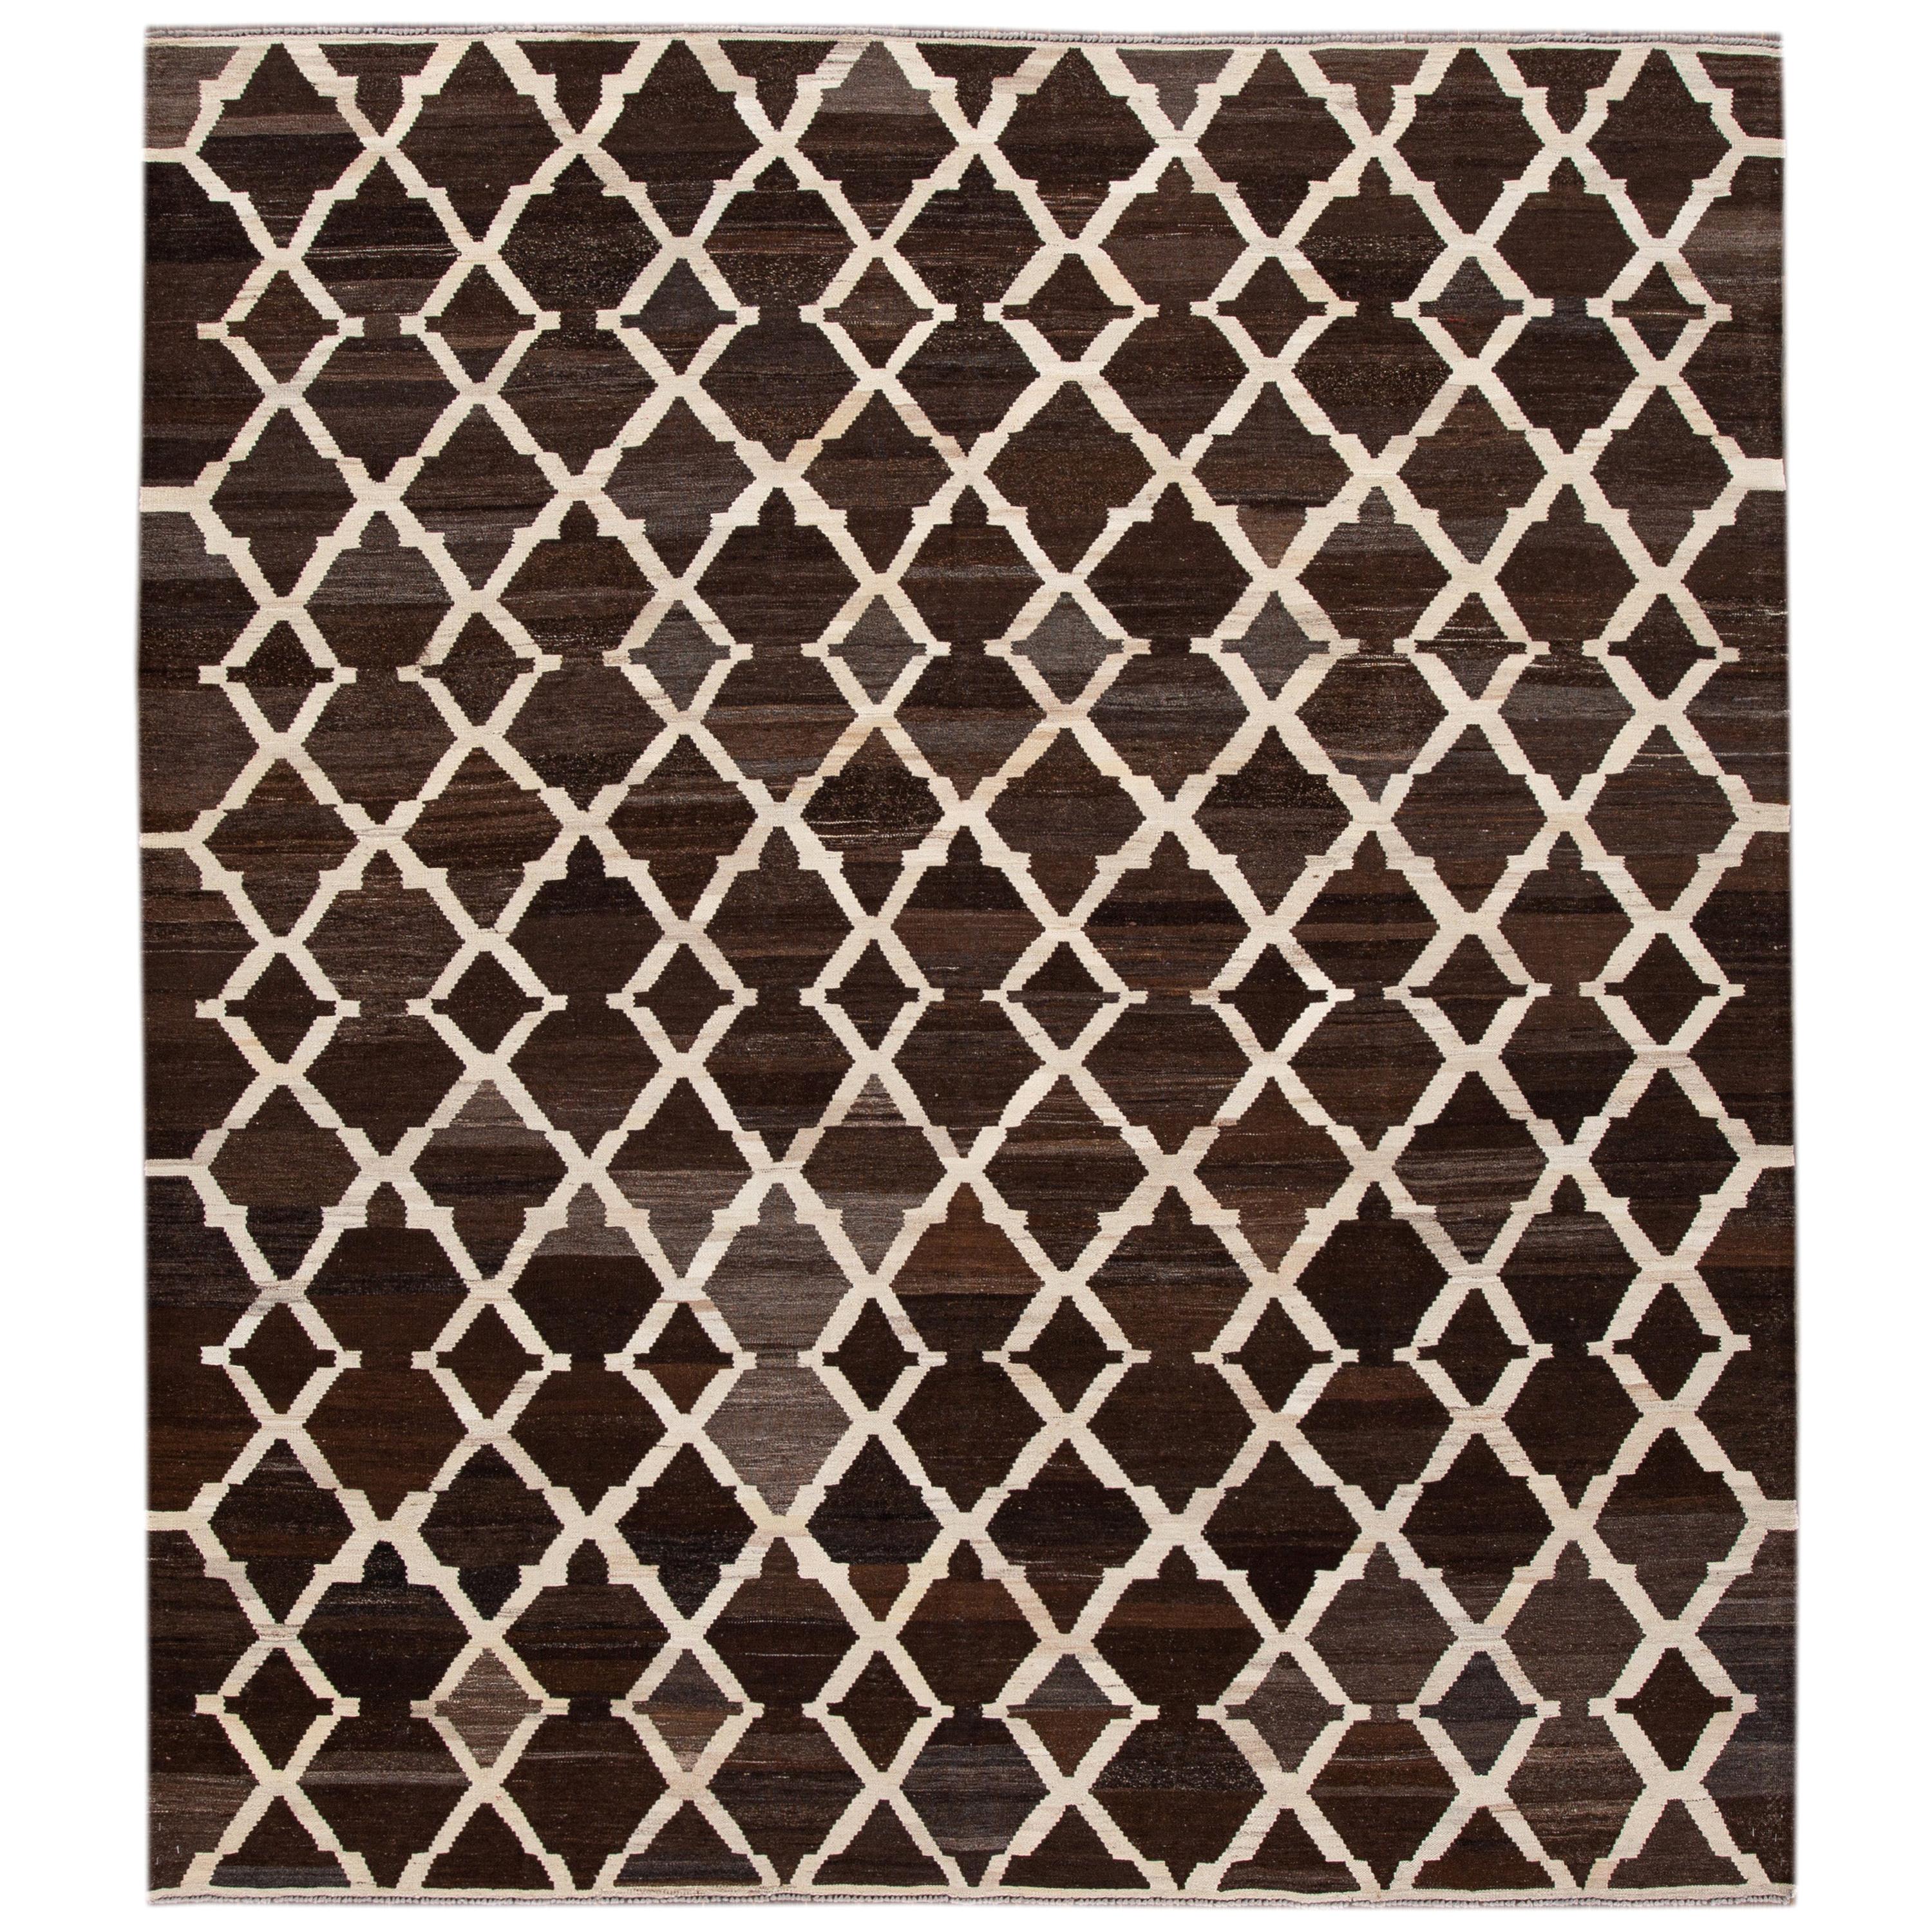 Contemporary Brown Flaweave Kilim Wool Rug With Trellis Design